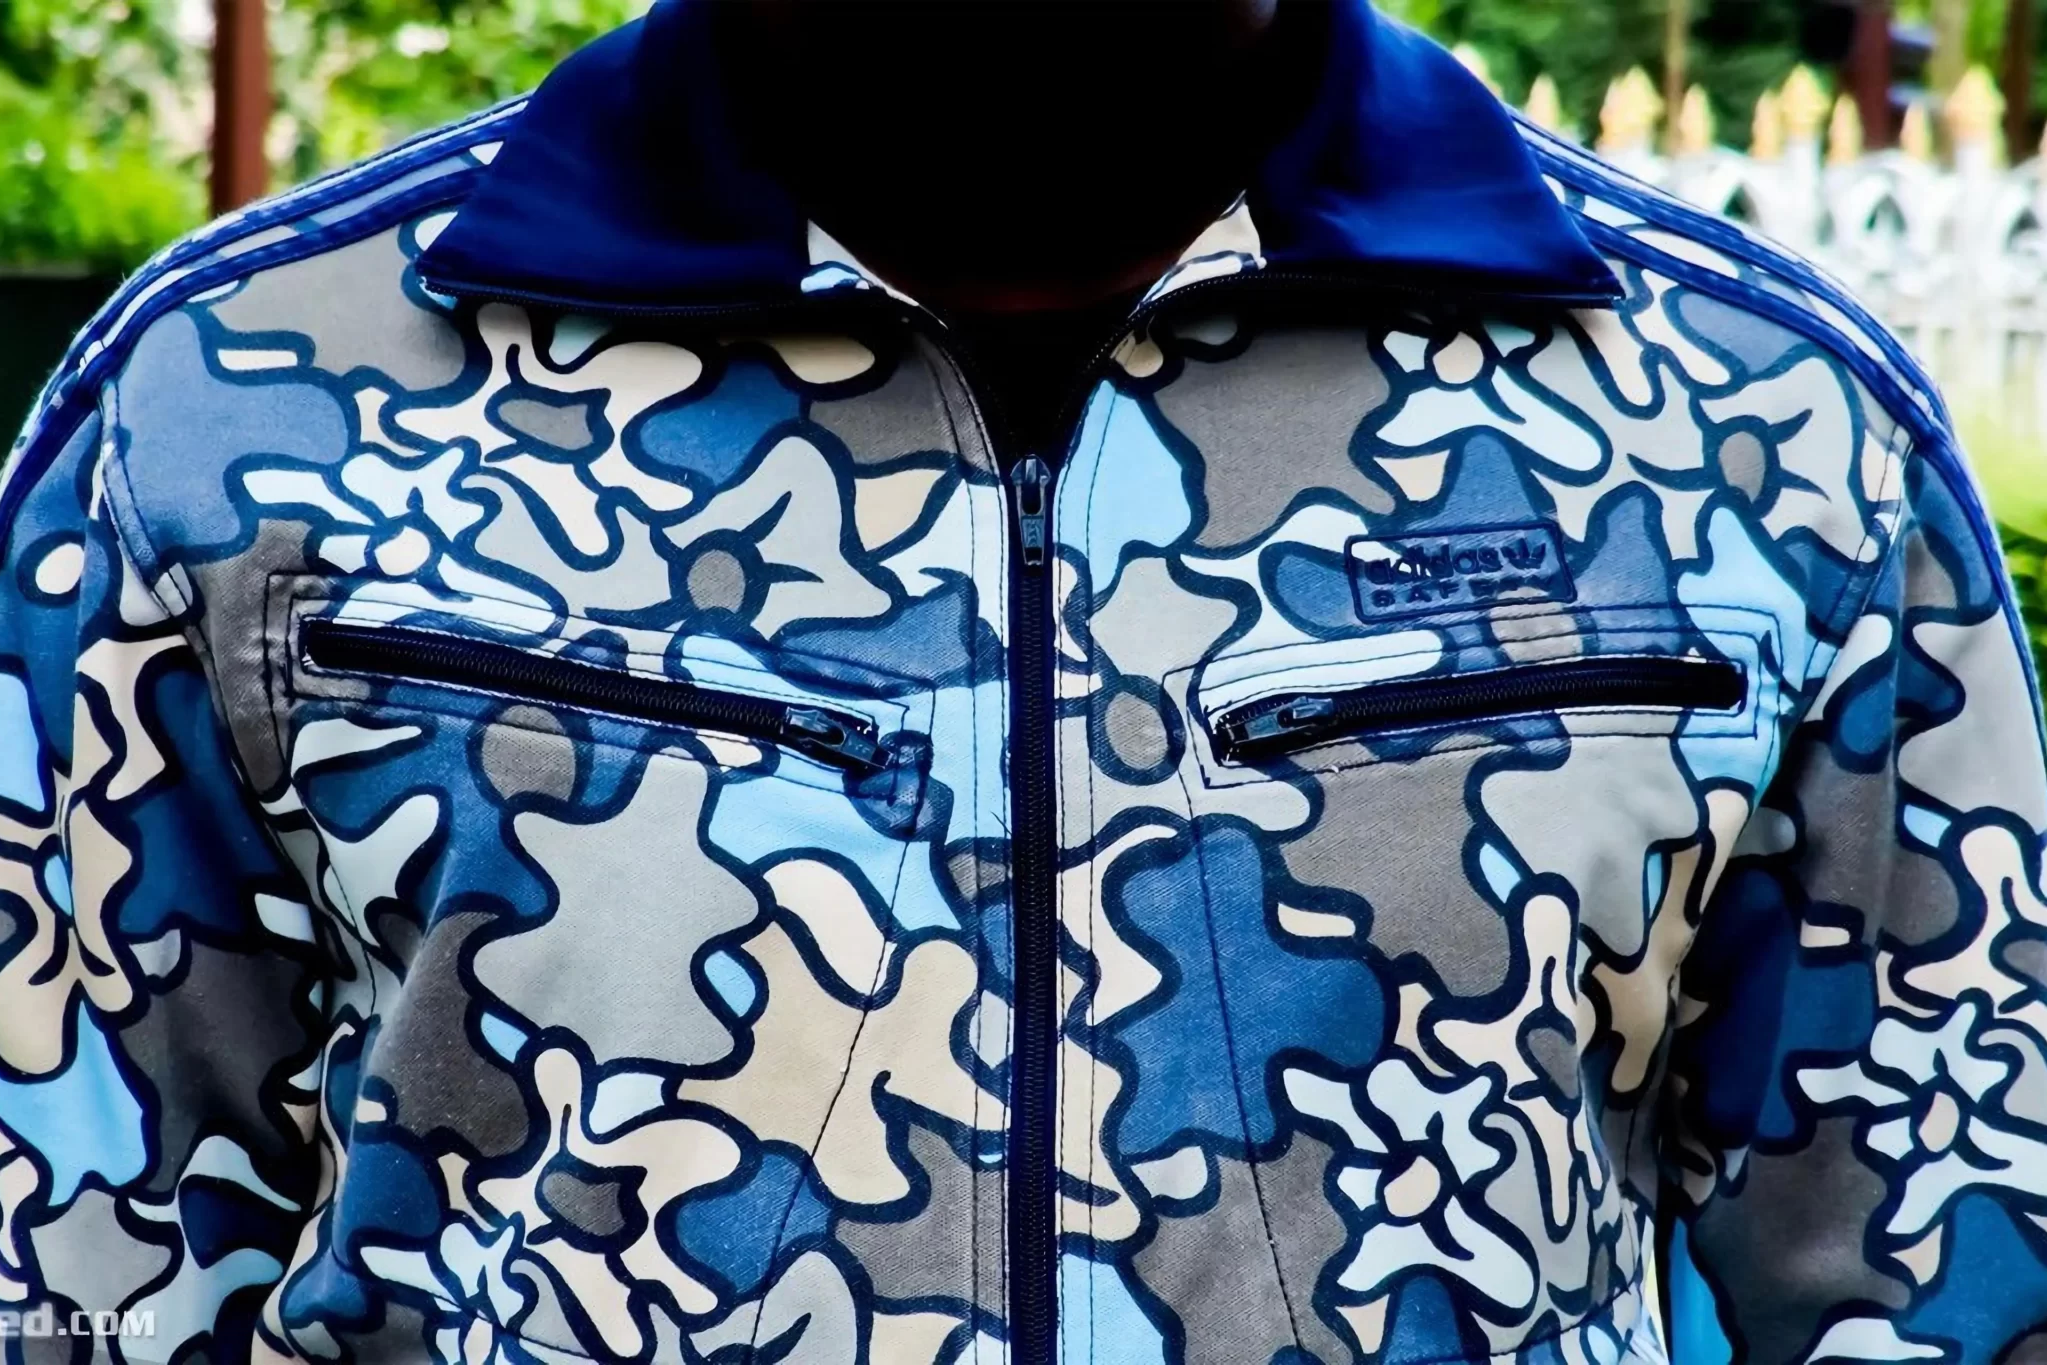 Men’s 2006 Adidas Originals Blue Safety Camo Track Top: Colossal (EnLawded.com file #lmchjtgmxqi2bpoo2rs)